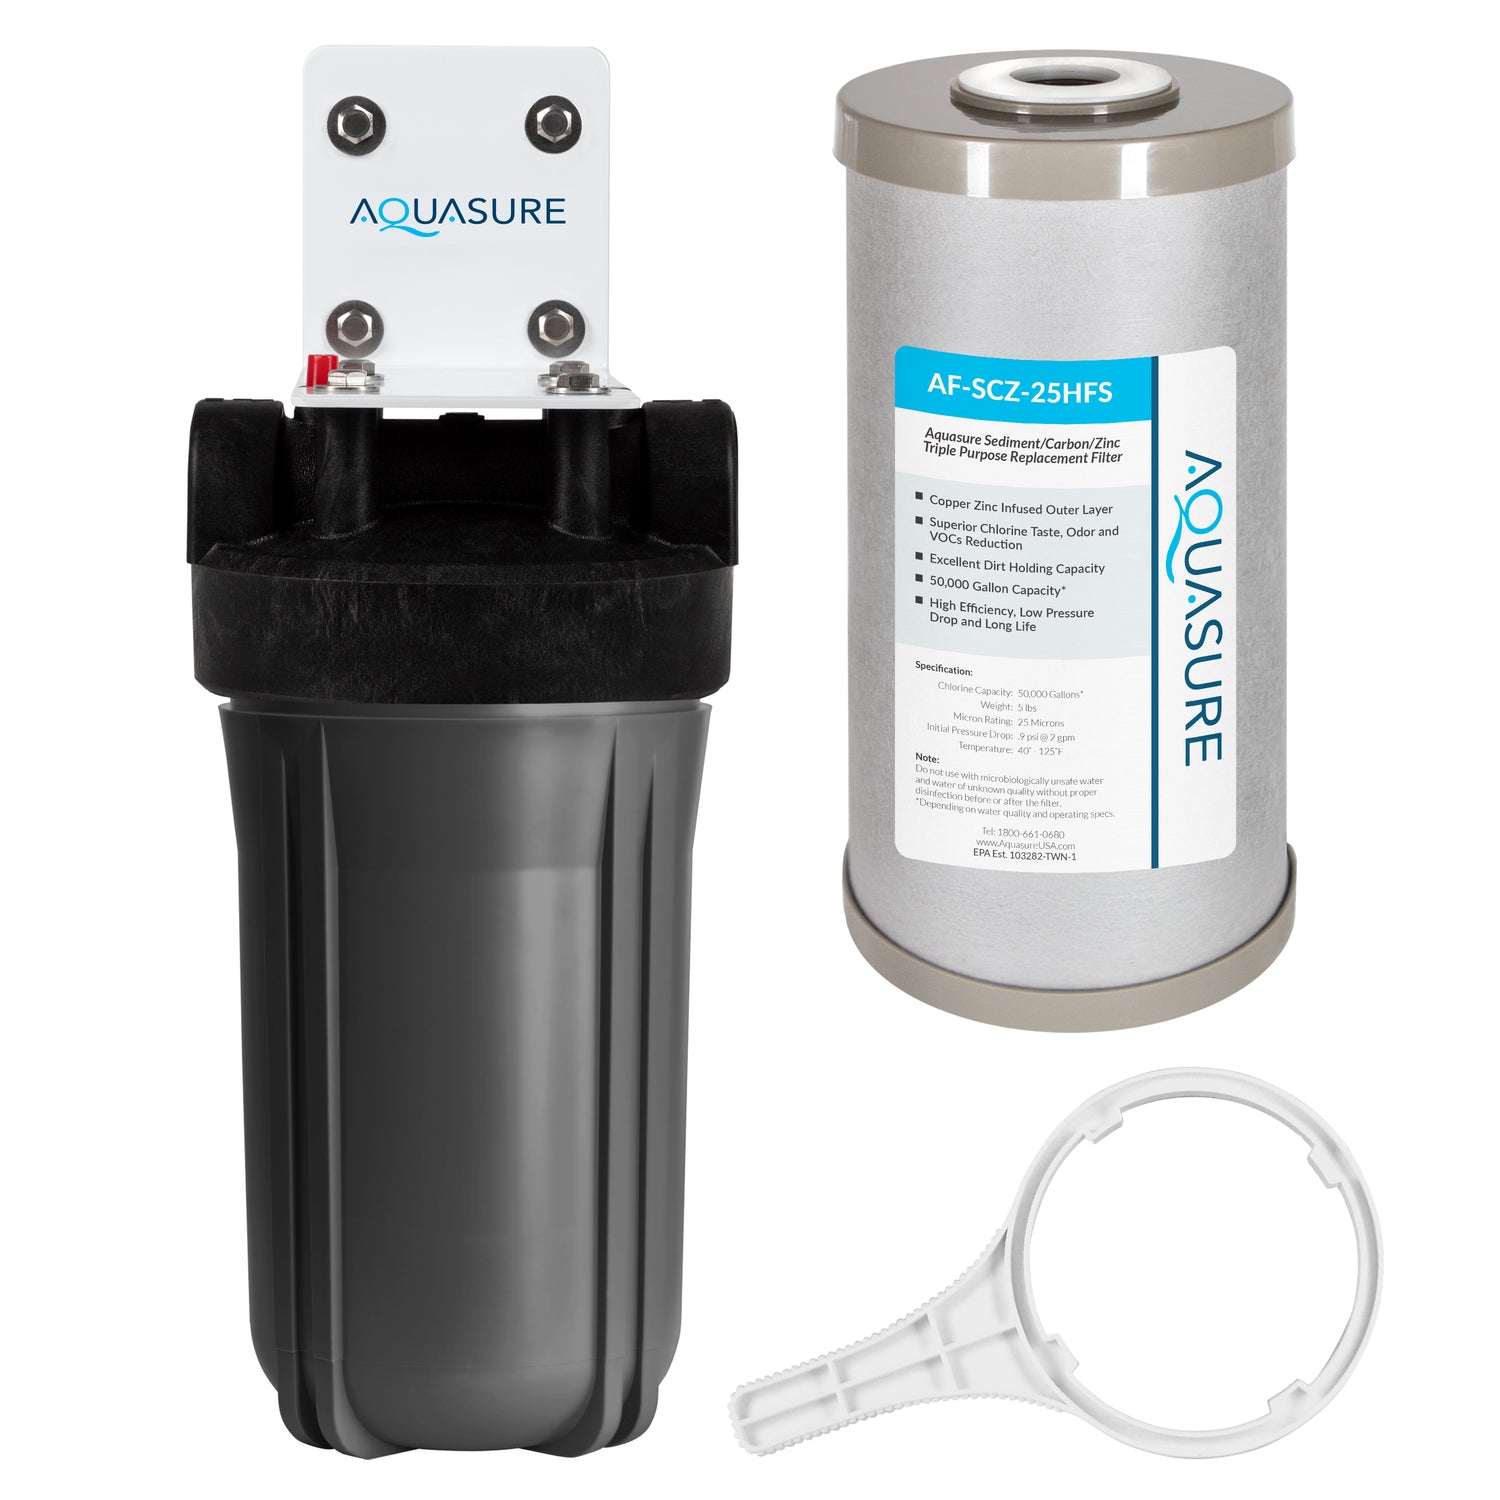 Fortitude V2 Series | Whole House Triple Purpose Filtration System - Small Size